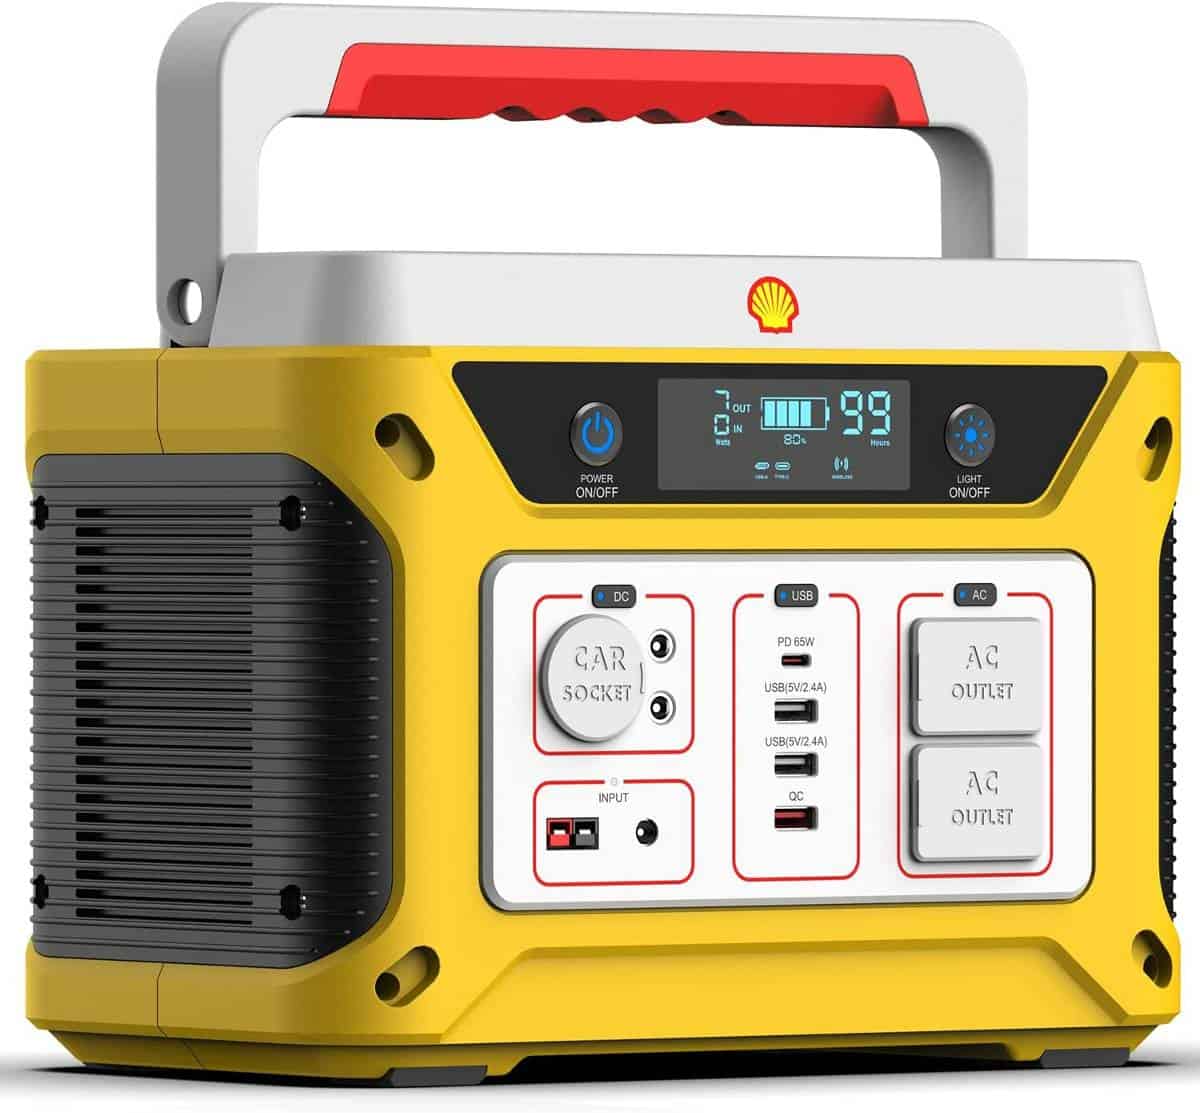 Topping our van life must-have is a portable power station from Shell